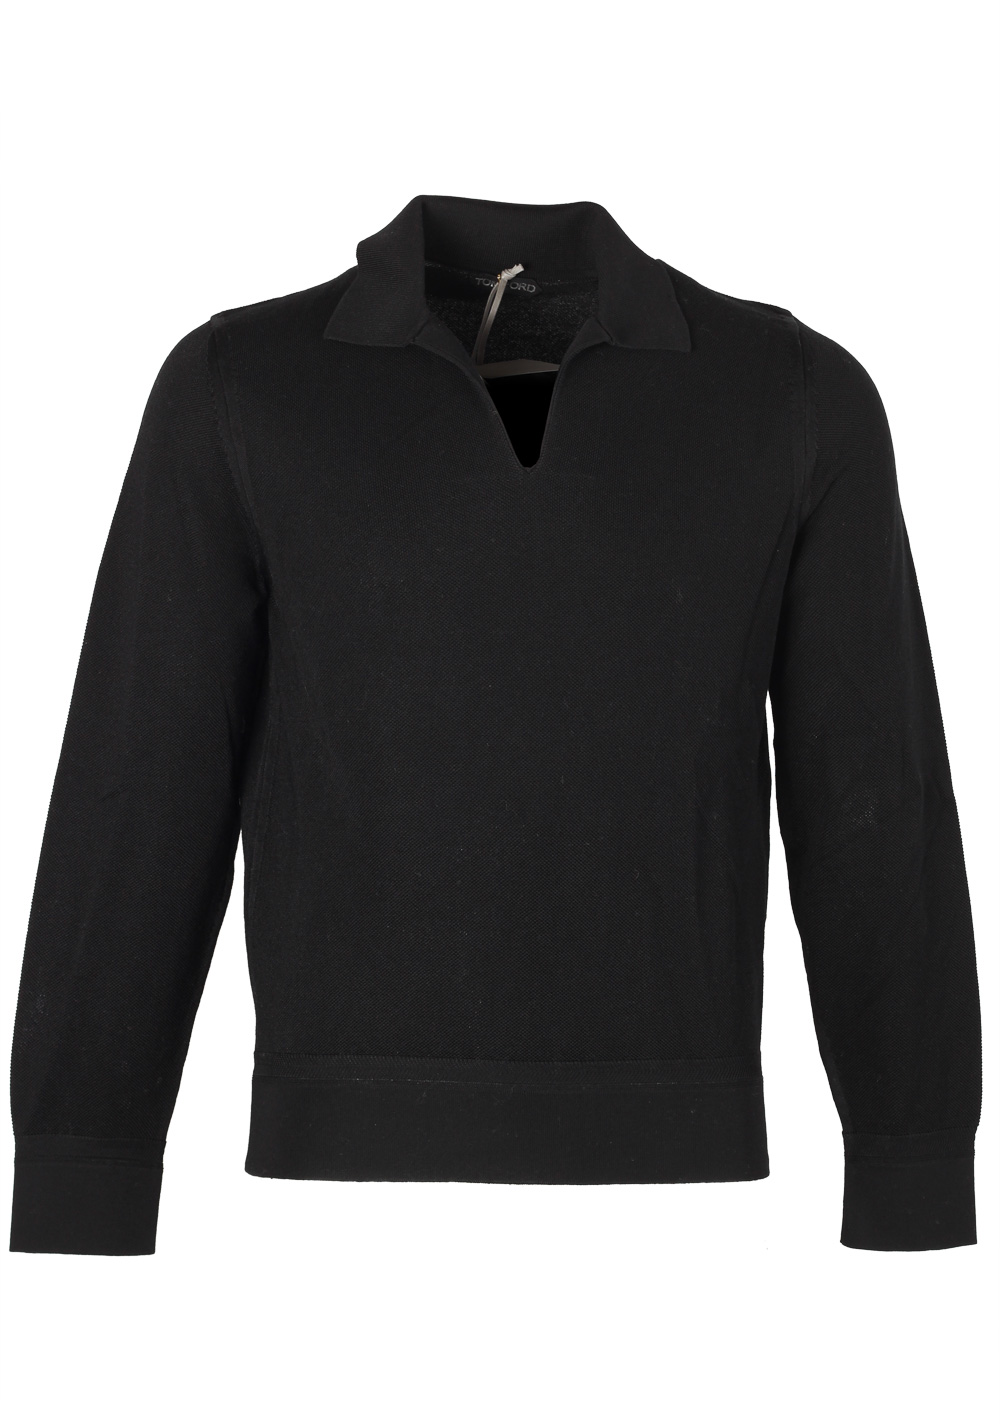 TOM FORD Black Long Sleeve Polo Sweater Size 48 / 38R U.S. | Costume Limité